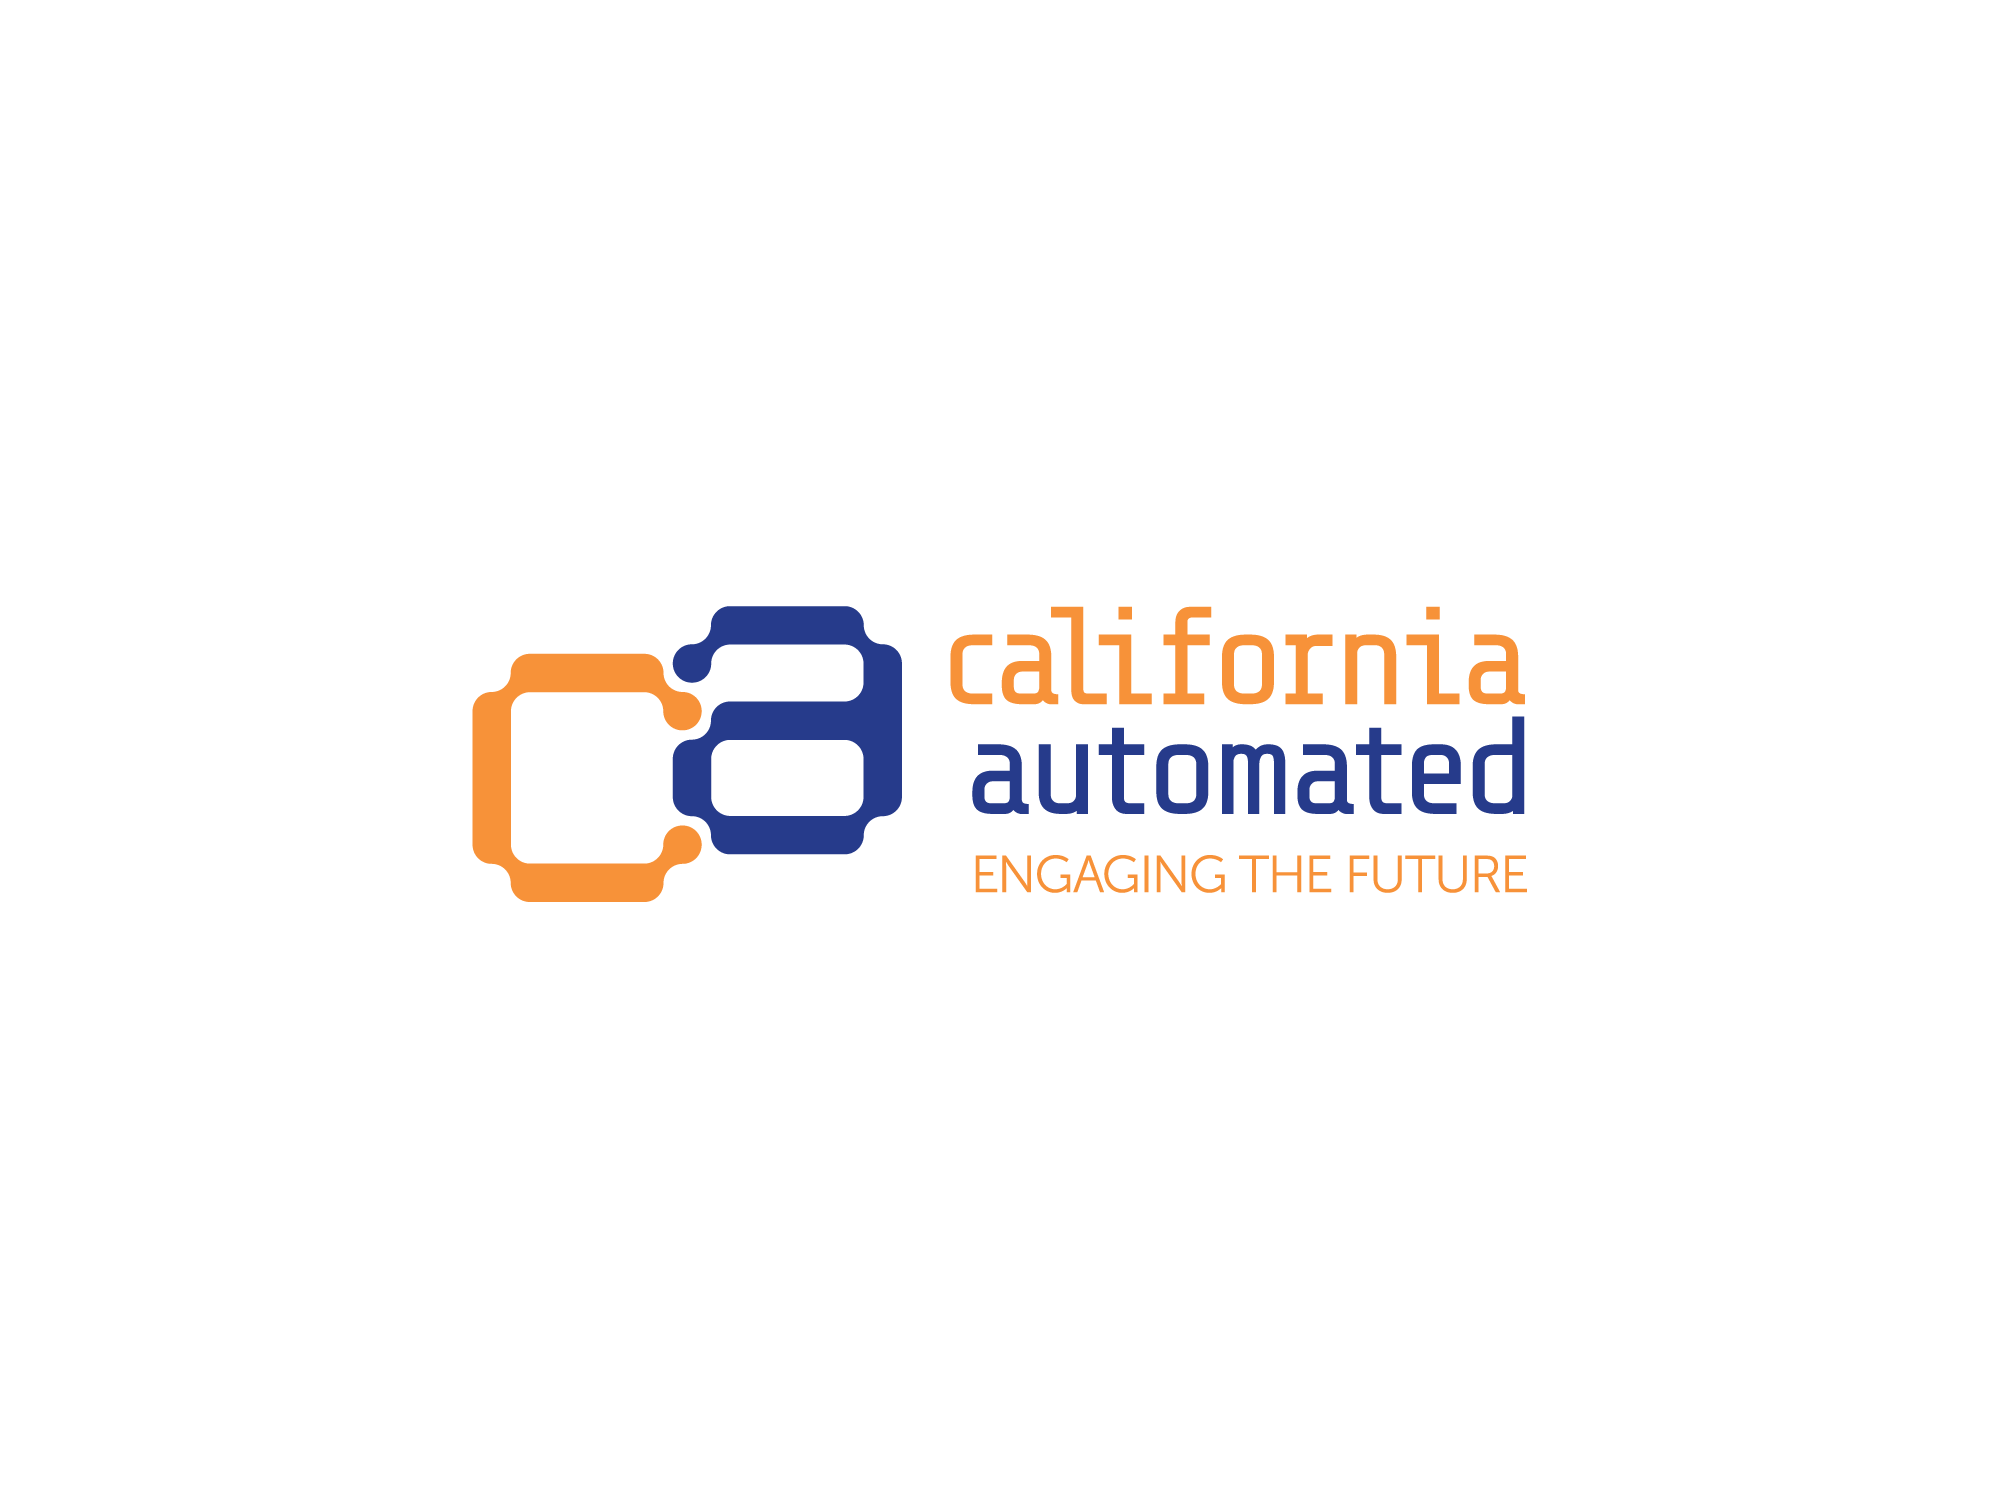 This is California Automated Brand Development Logo